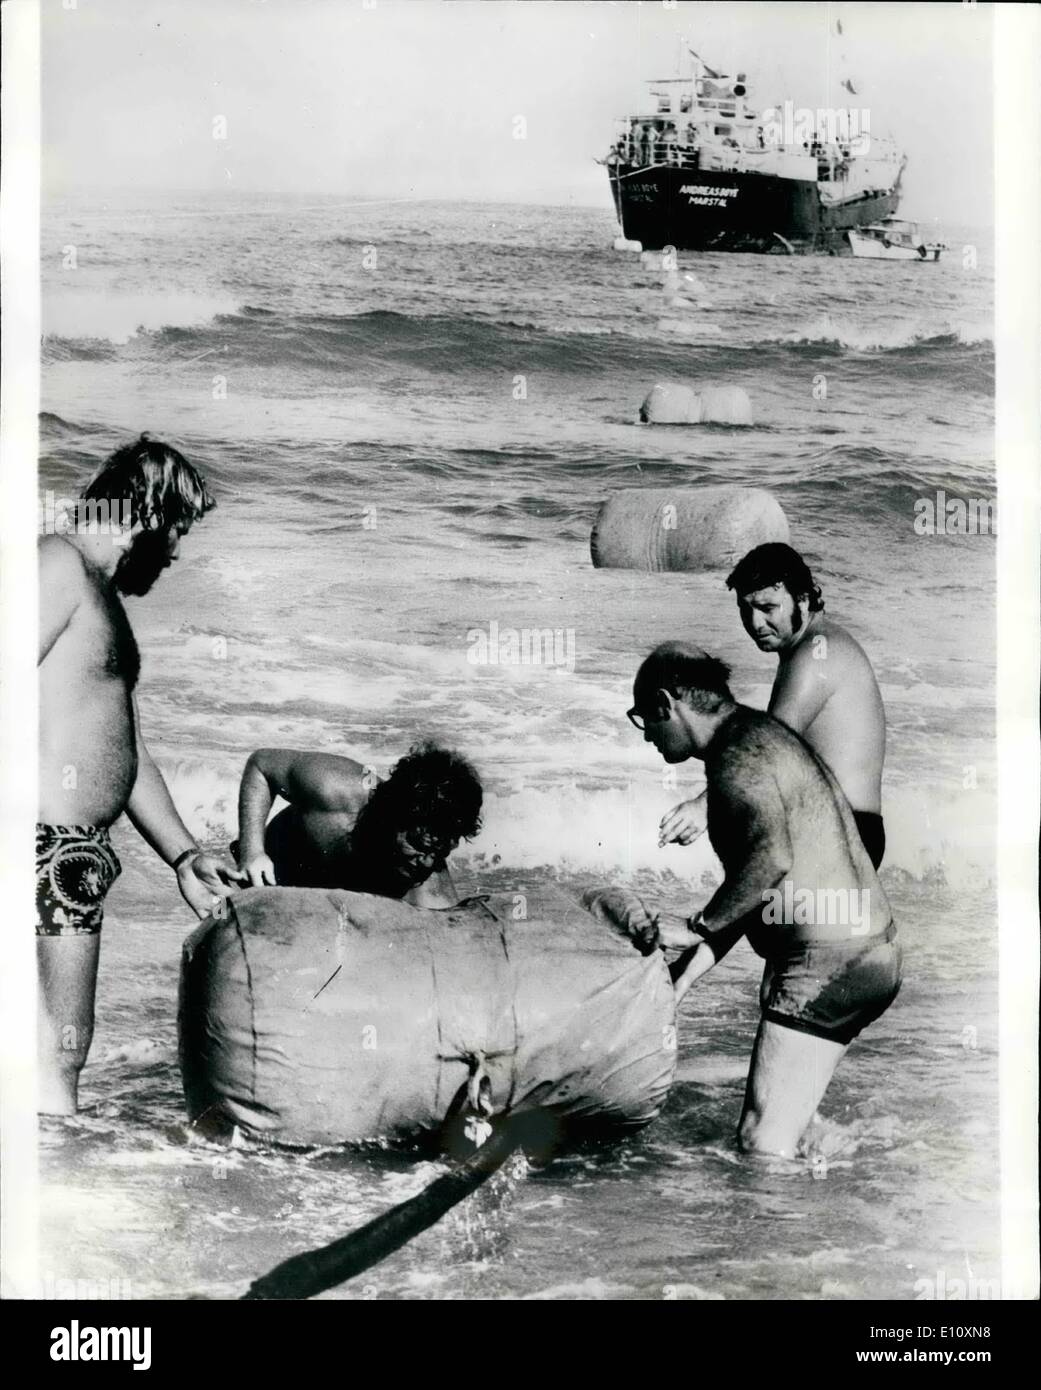 Aug. 08, 1974 - New Telephone Cable From Tel Aviv To Rome: A new submarine telephone cable, being laid from Tel Aviv to Rome, will permit 15 times more telephone and telex calls between Israel and Europe, with a capacity of 1,840 simultaneous calls. An international firm was set up for laying the new cable, with Israel holding 50% of the stock and France and Italy 25% each! The existing submarined cable to Marseilles was laid six years ago and is capable of accomodating 128 calls simultaneously. Israel's share in the costs of the new cable IL Stock Photo